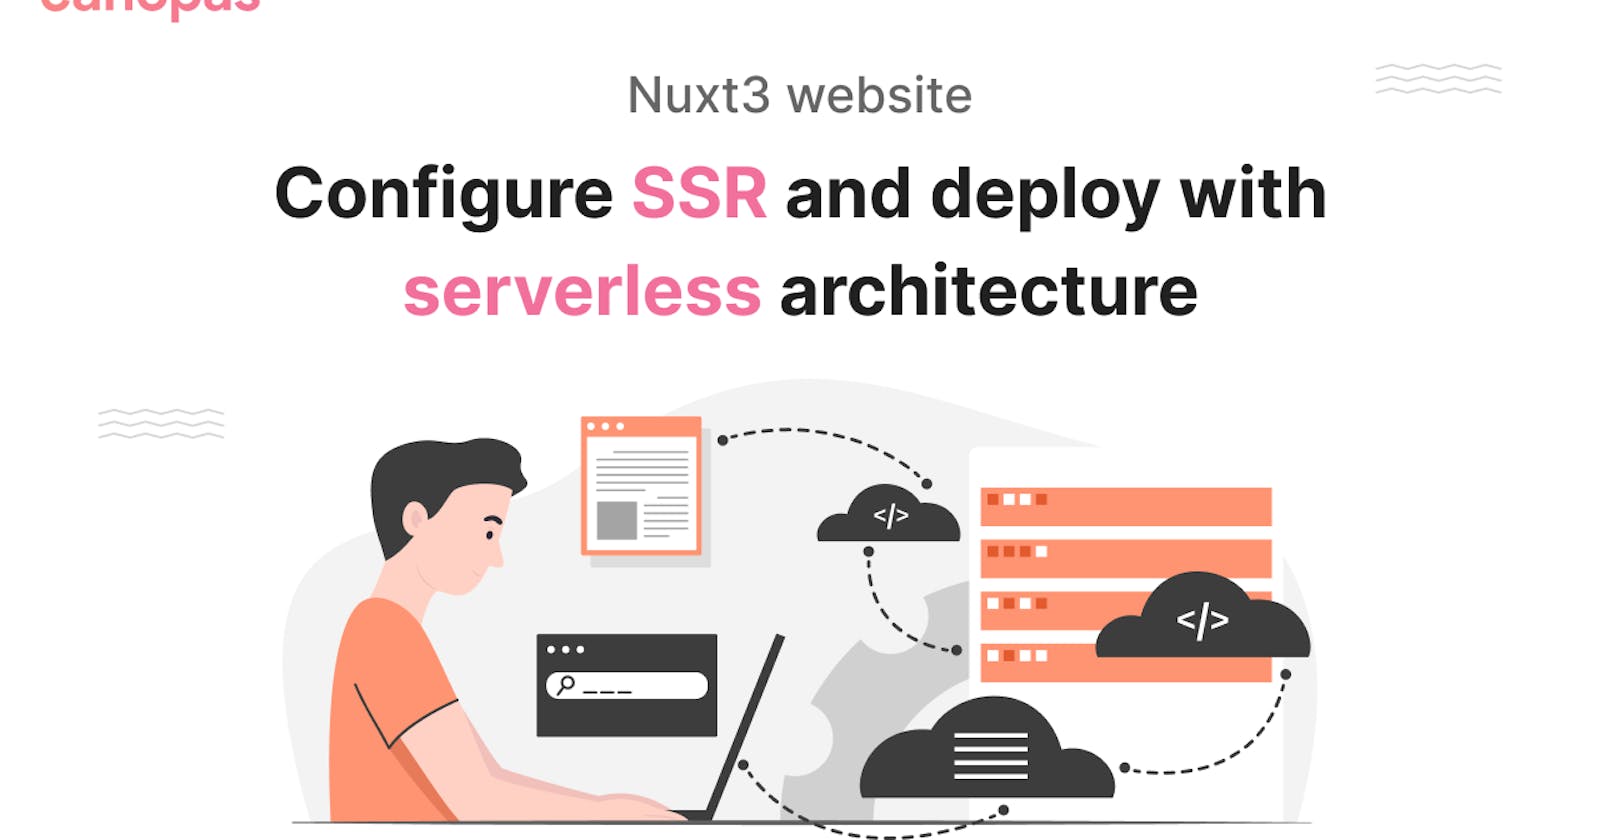 How to configure SSR in Nuxt3 and deploy it with Serverless Architecture